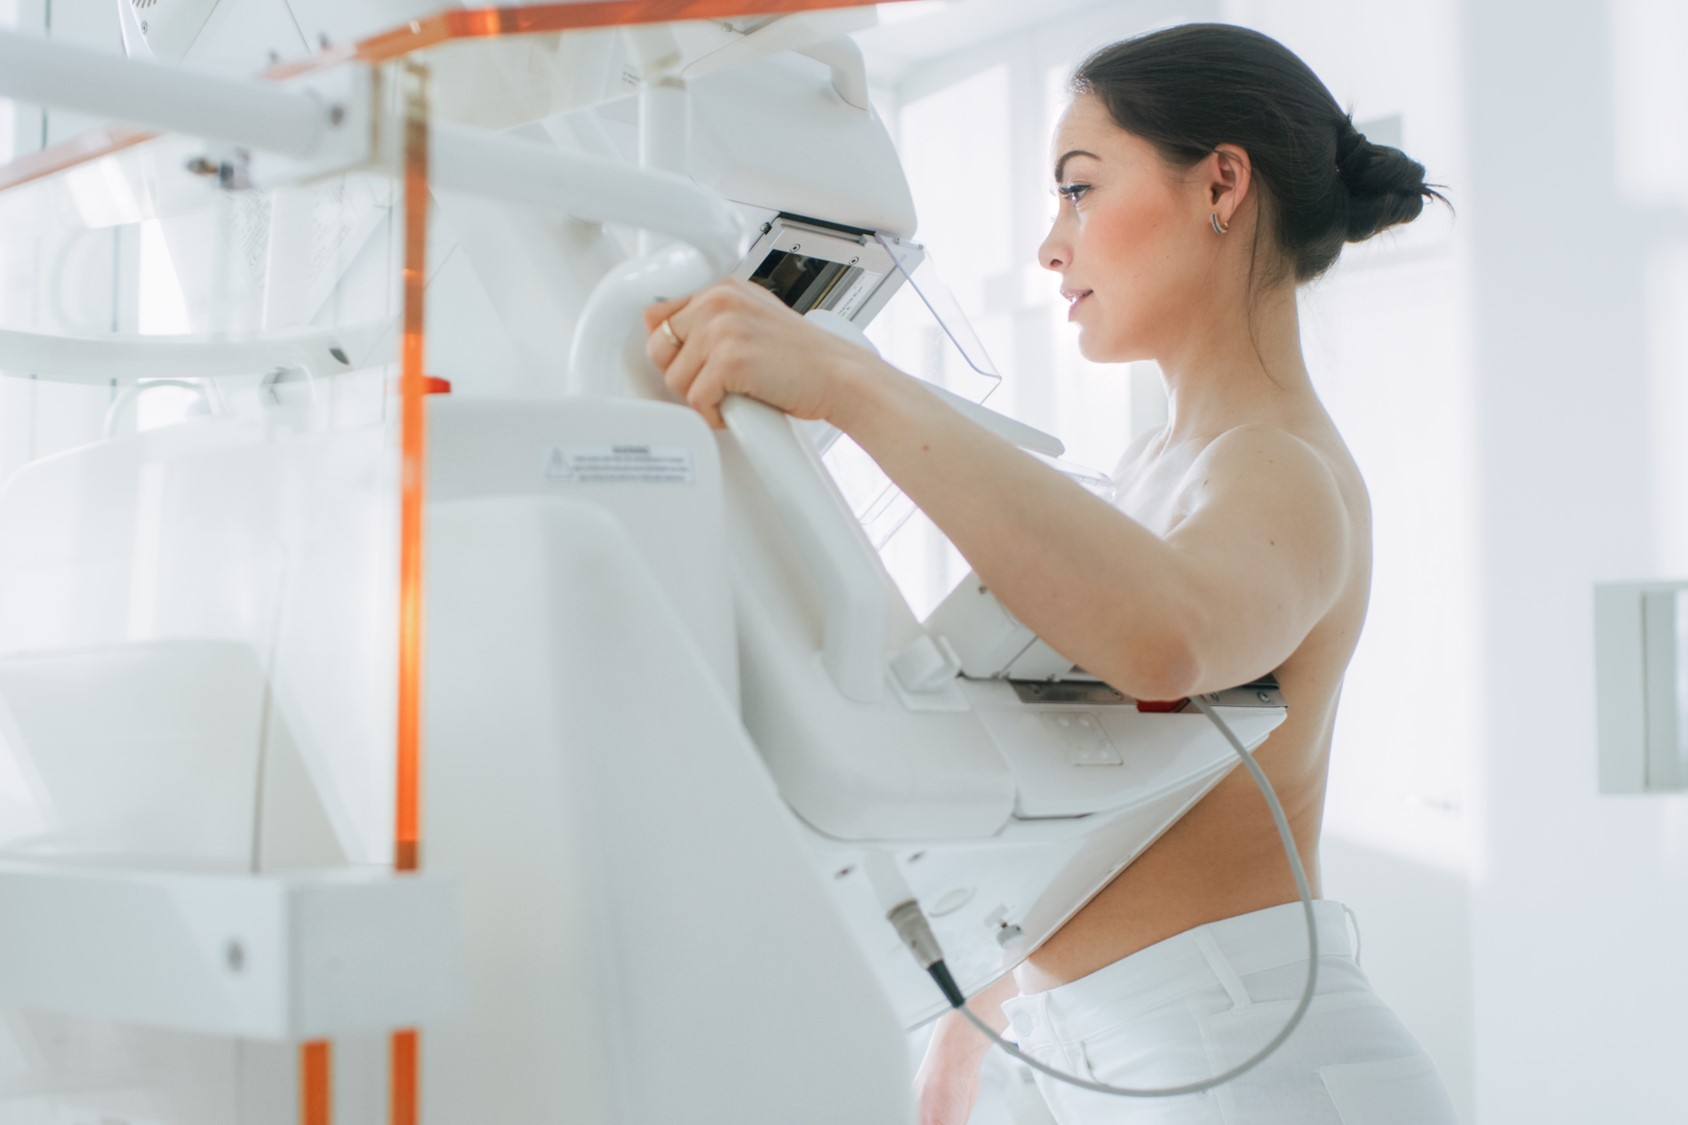 Breast screening and breast imaging – Where can I find an affordable clinic?